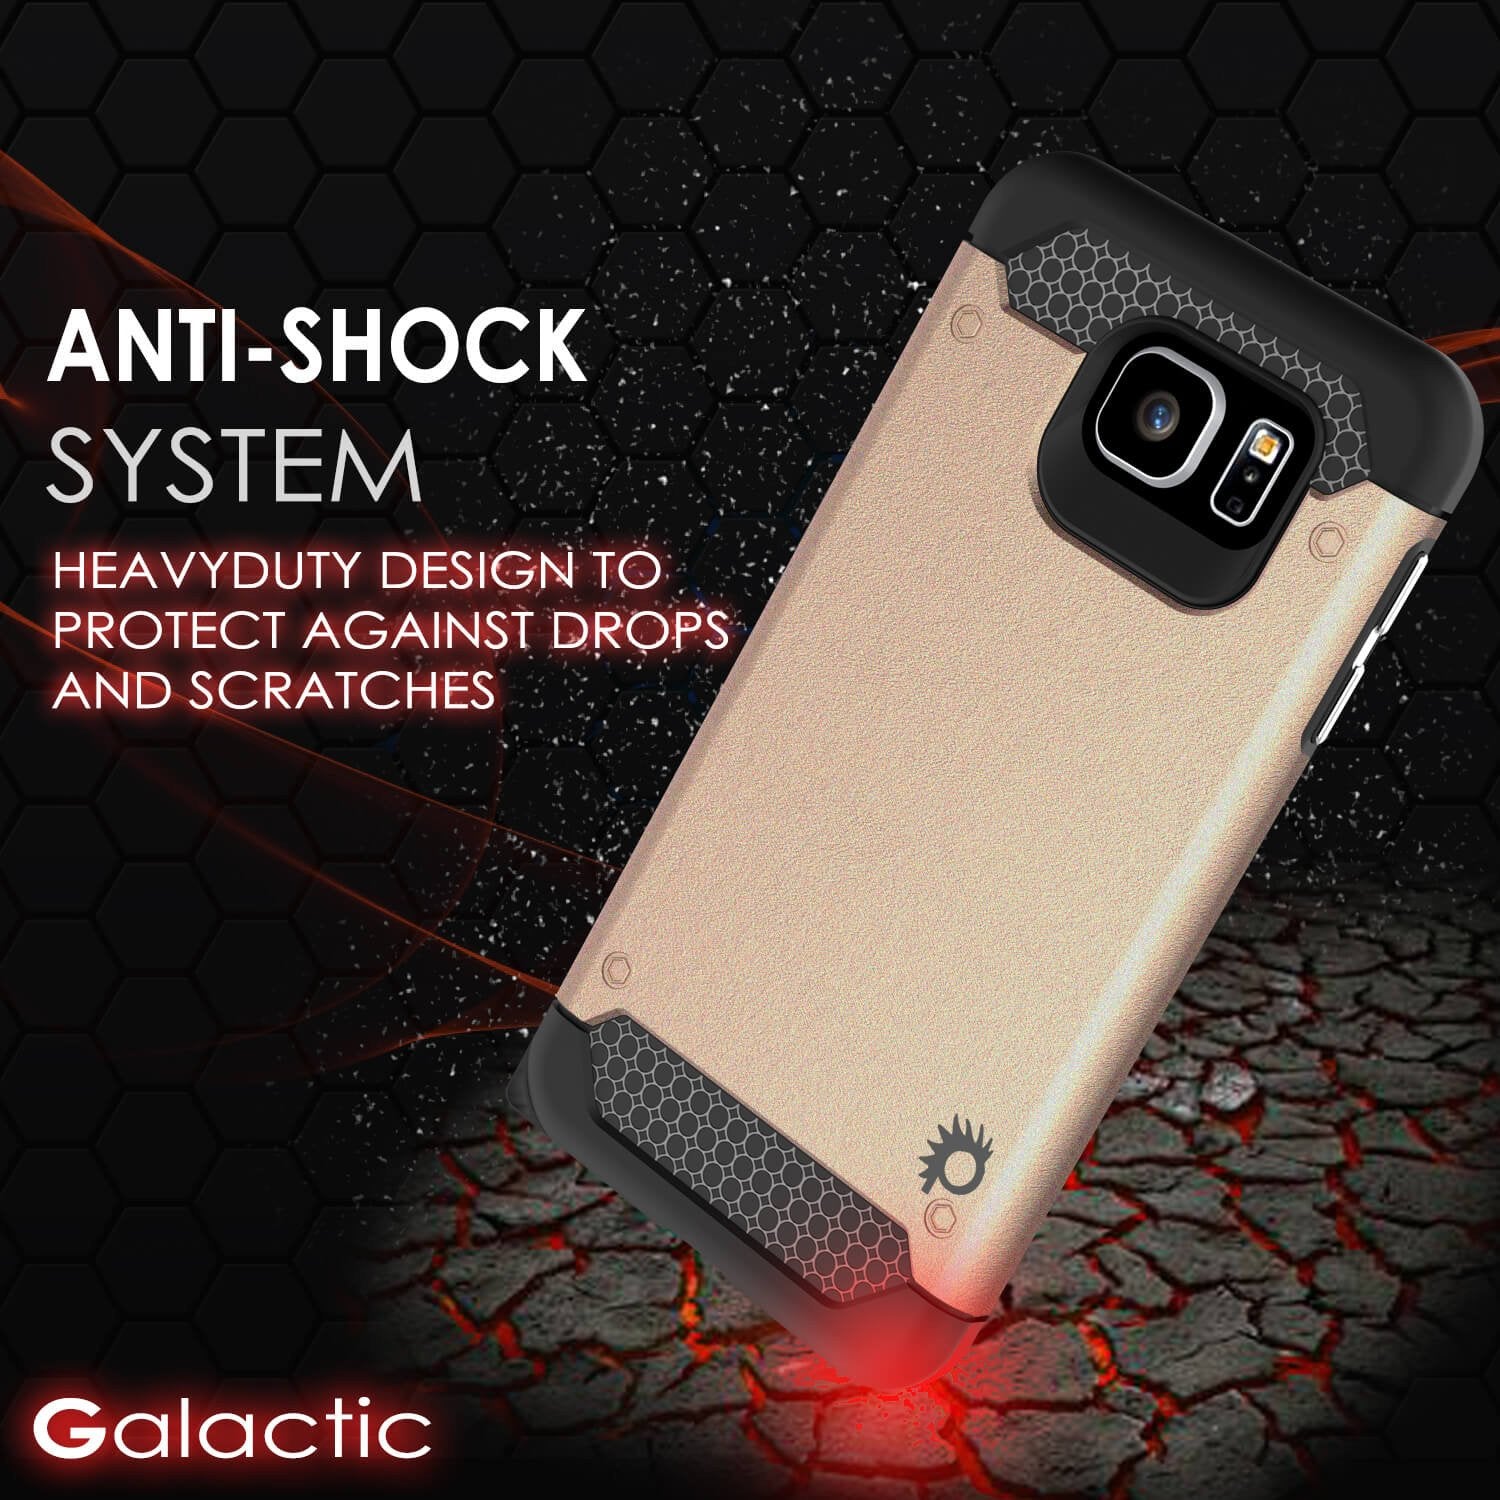 Galaxy s6 Case PunkCase Galactic Gold Series Slim Armor Soft Cover Case w/ Tempered Glass - PunkCase NZ